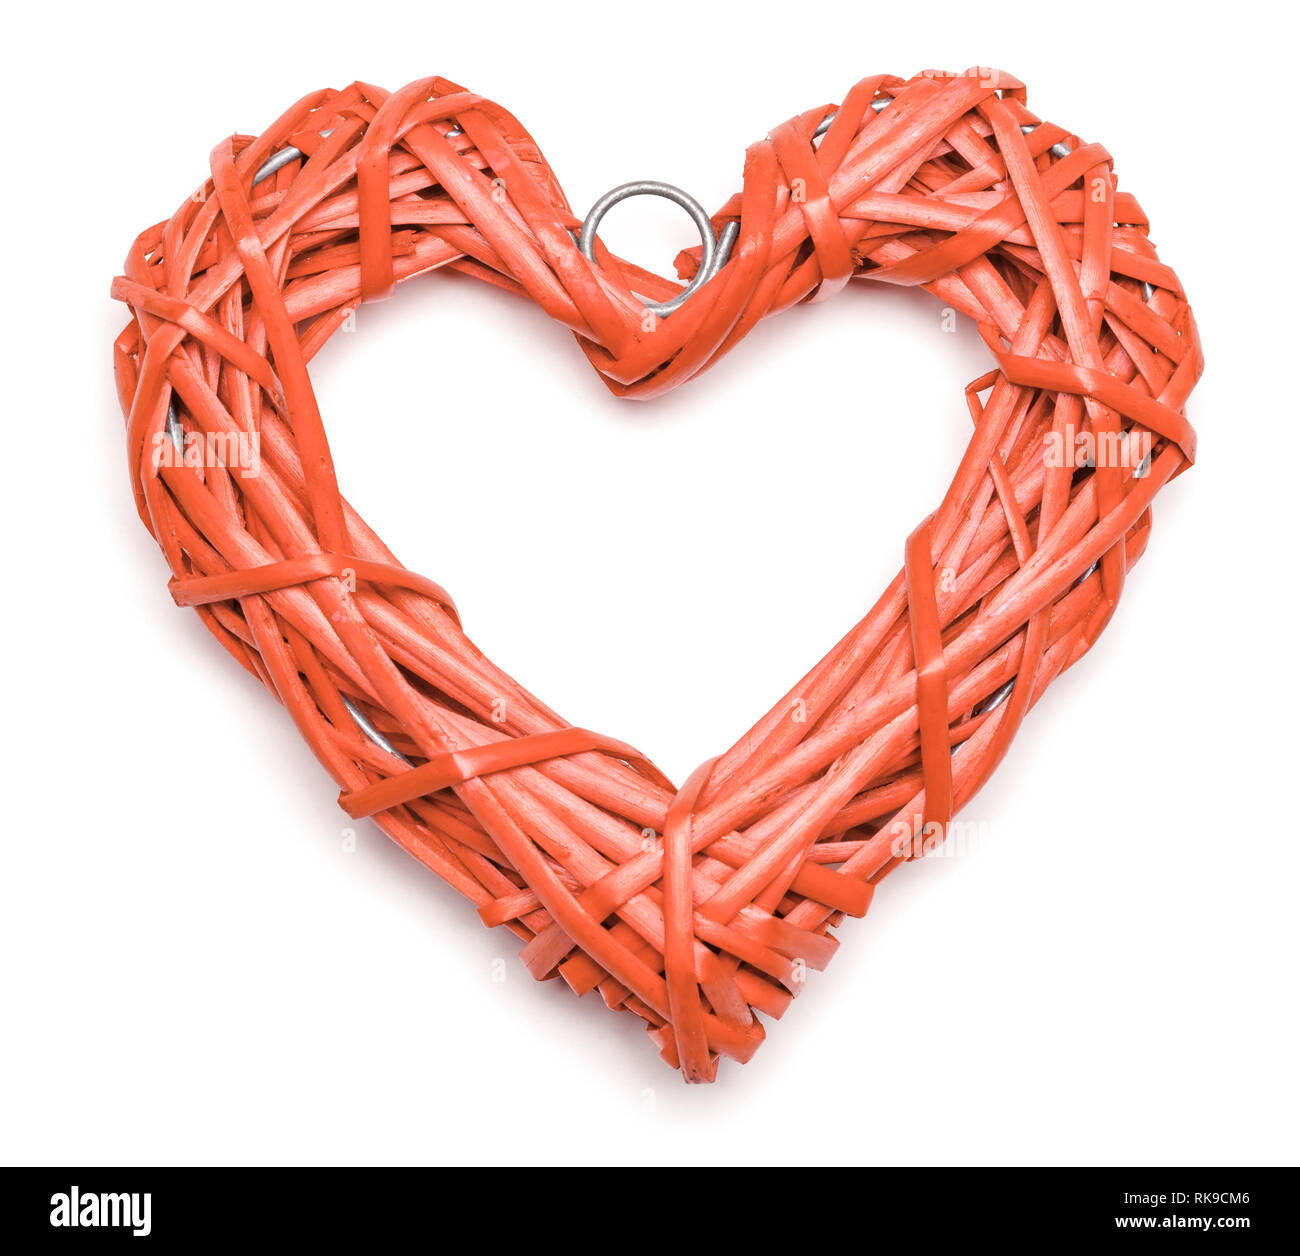 Coral color heart shaped braided wicker on white background Stock Photo